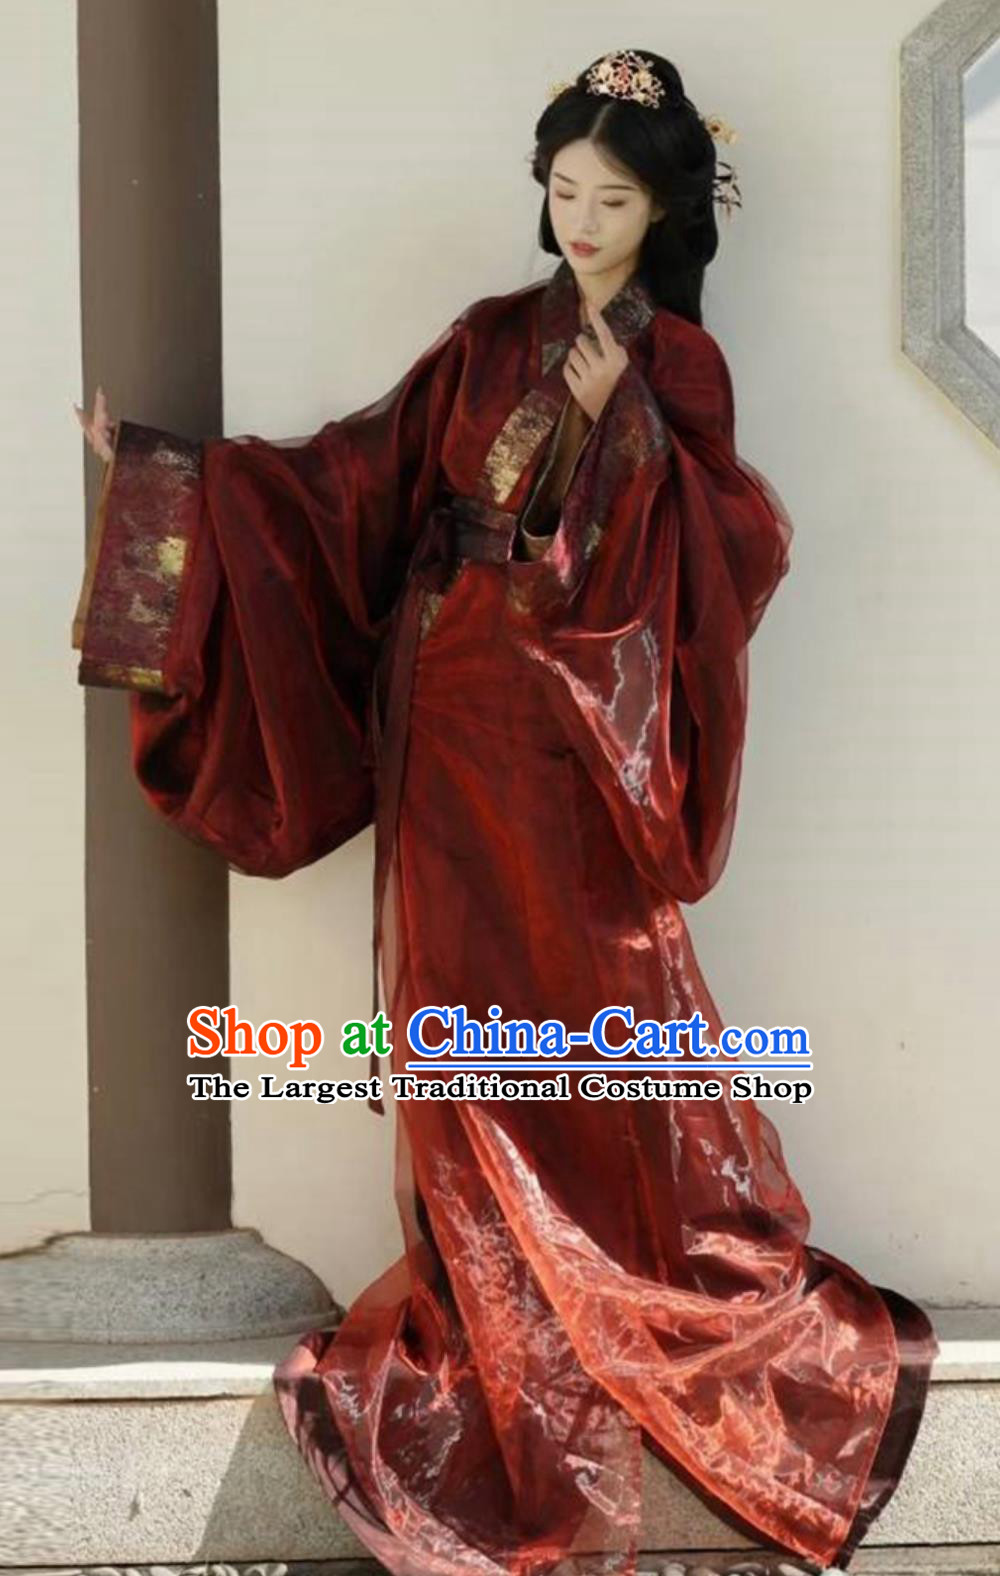 Traditional Hanfu Dark Red Warring States Robe Chinese Han Dynasty Court Lady Clothing Ancient China Princess Costume